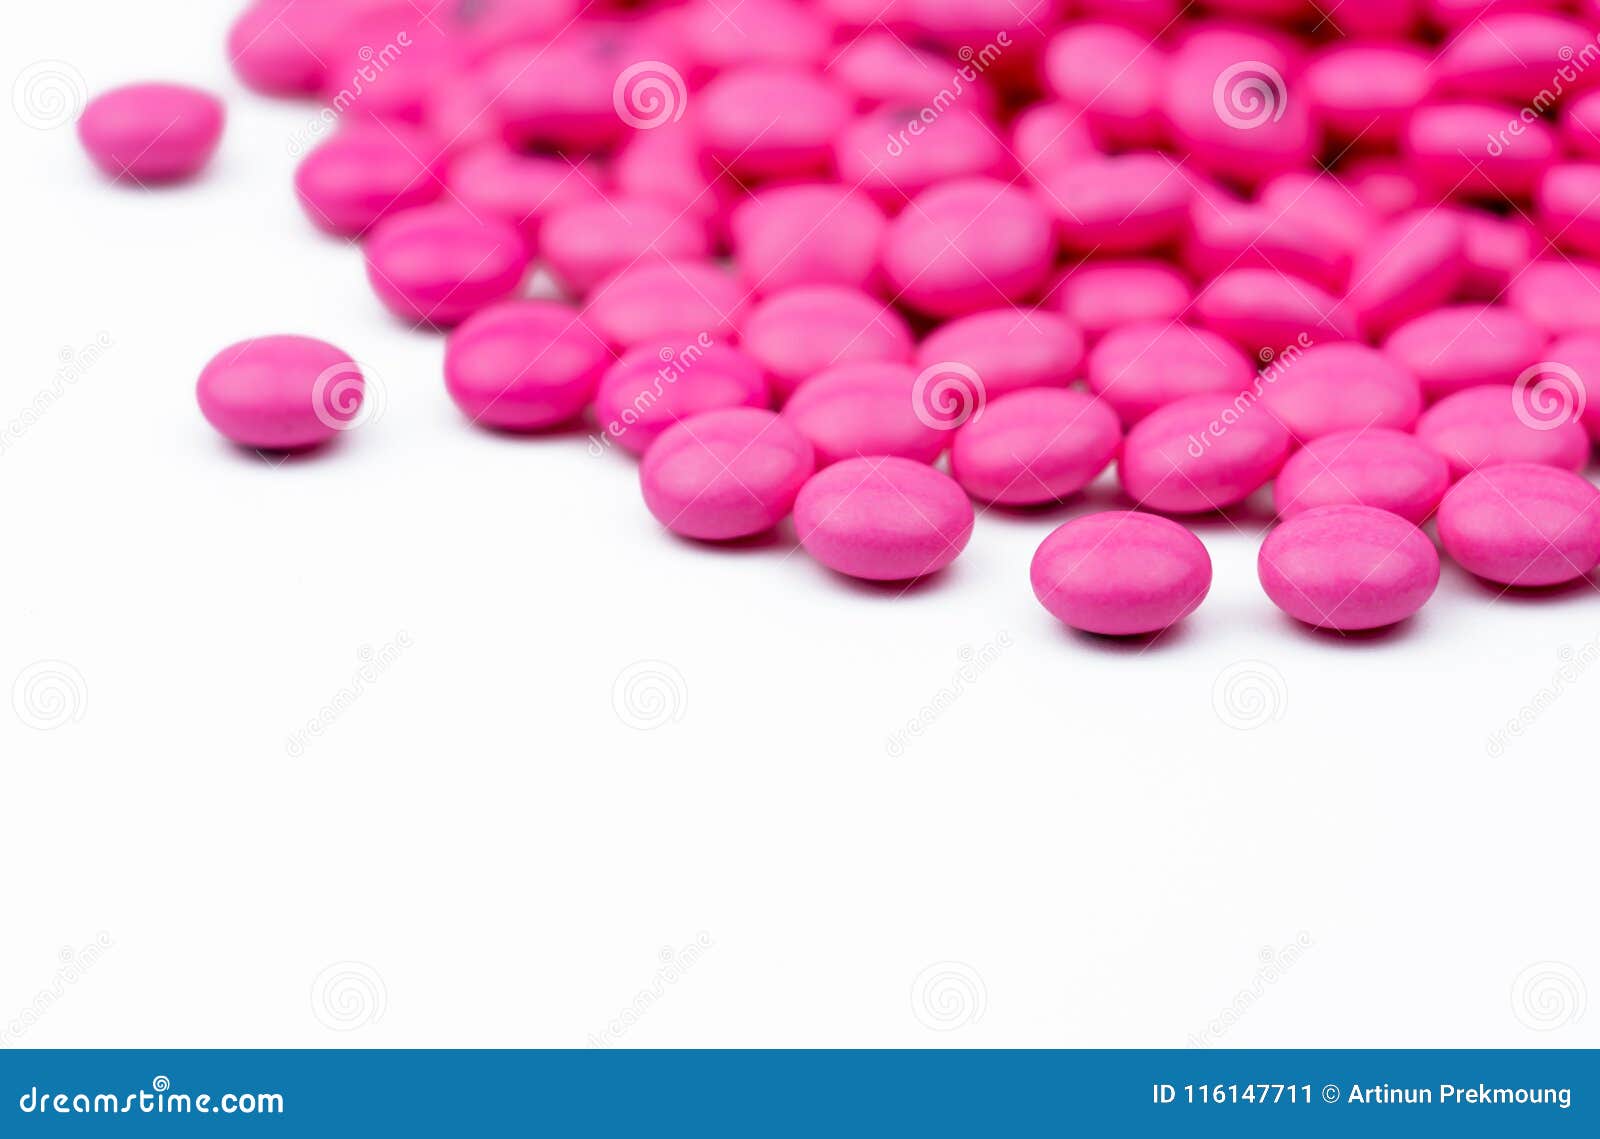 closeup pile of pink round sugar coated tablets pills  on white background with copy space. amitriptyline medicine